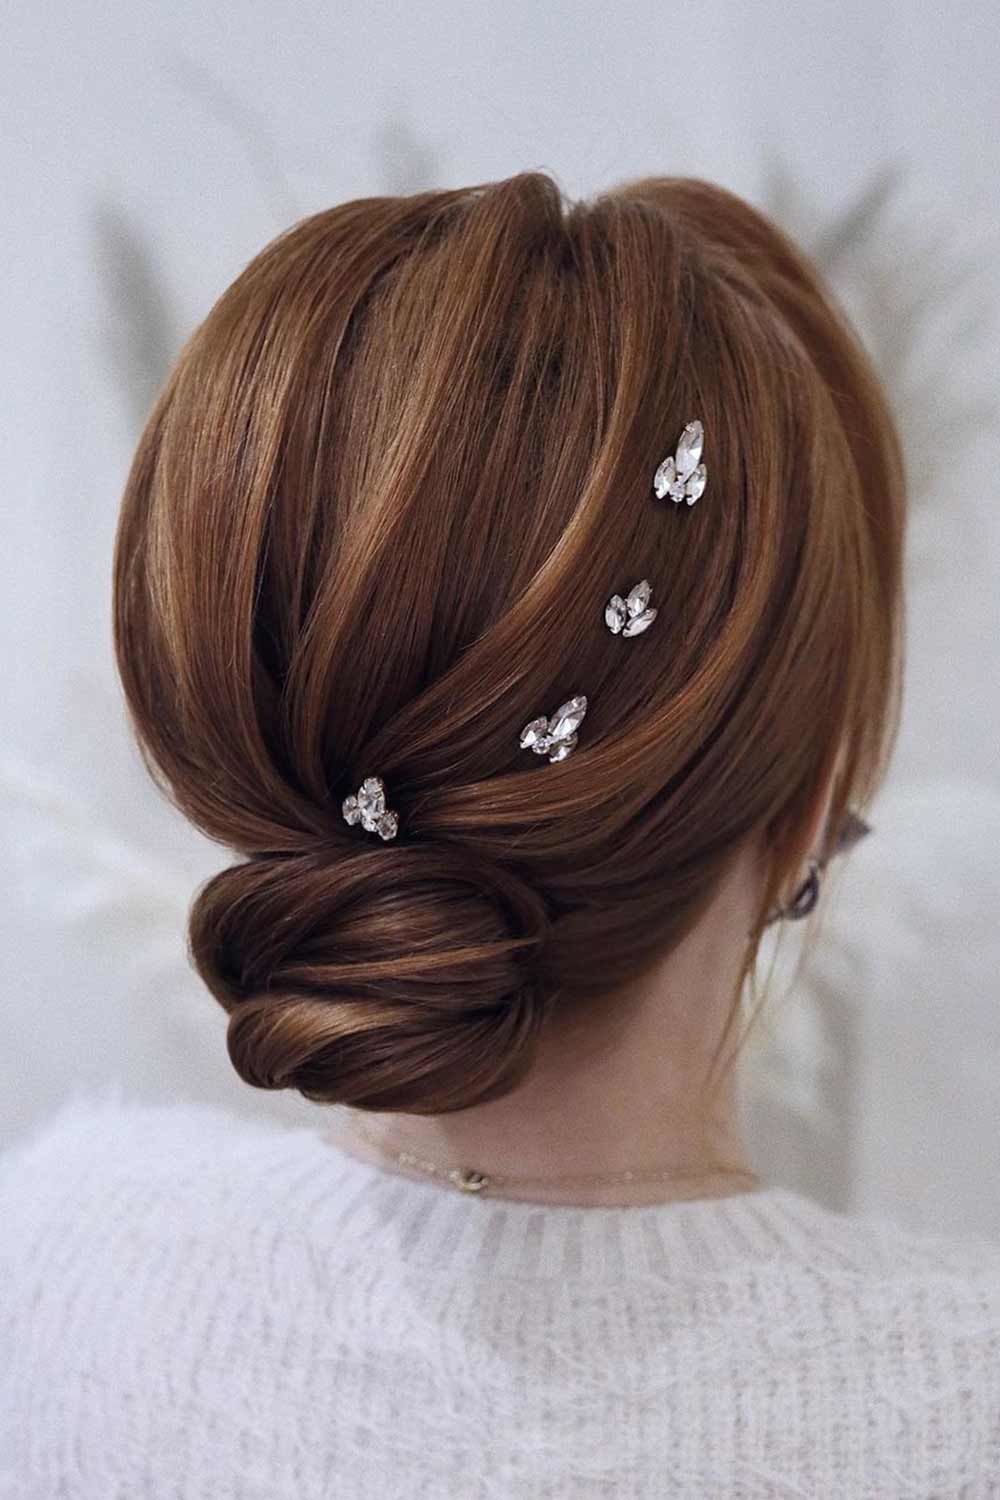 25+ Fresh Spring Hairstyles to Try Now - Love Hairstyles